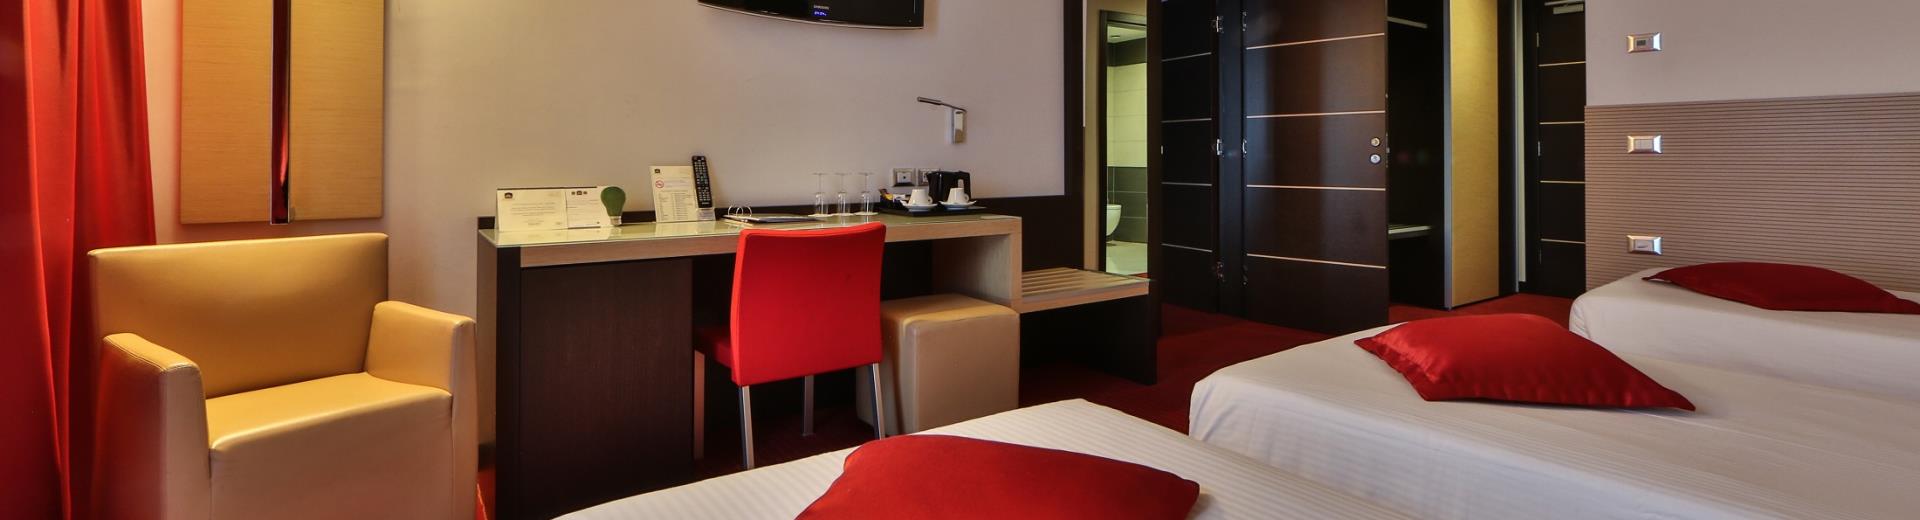 Discover the rooms of the Best Western Plus Hotel Galileo Padua